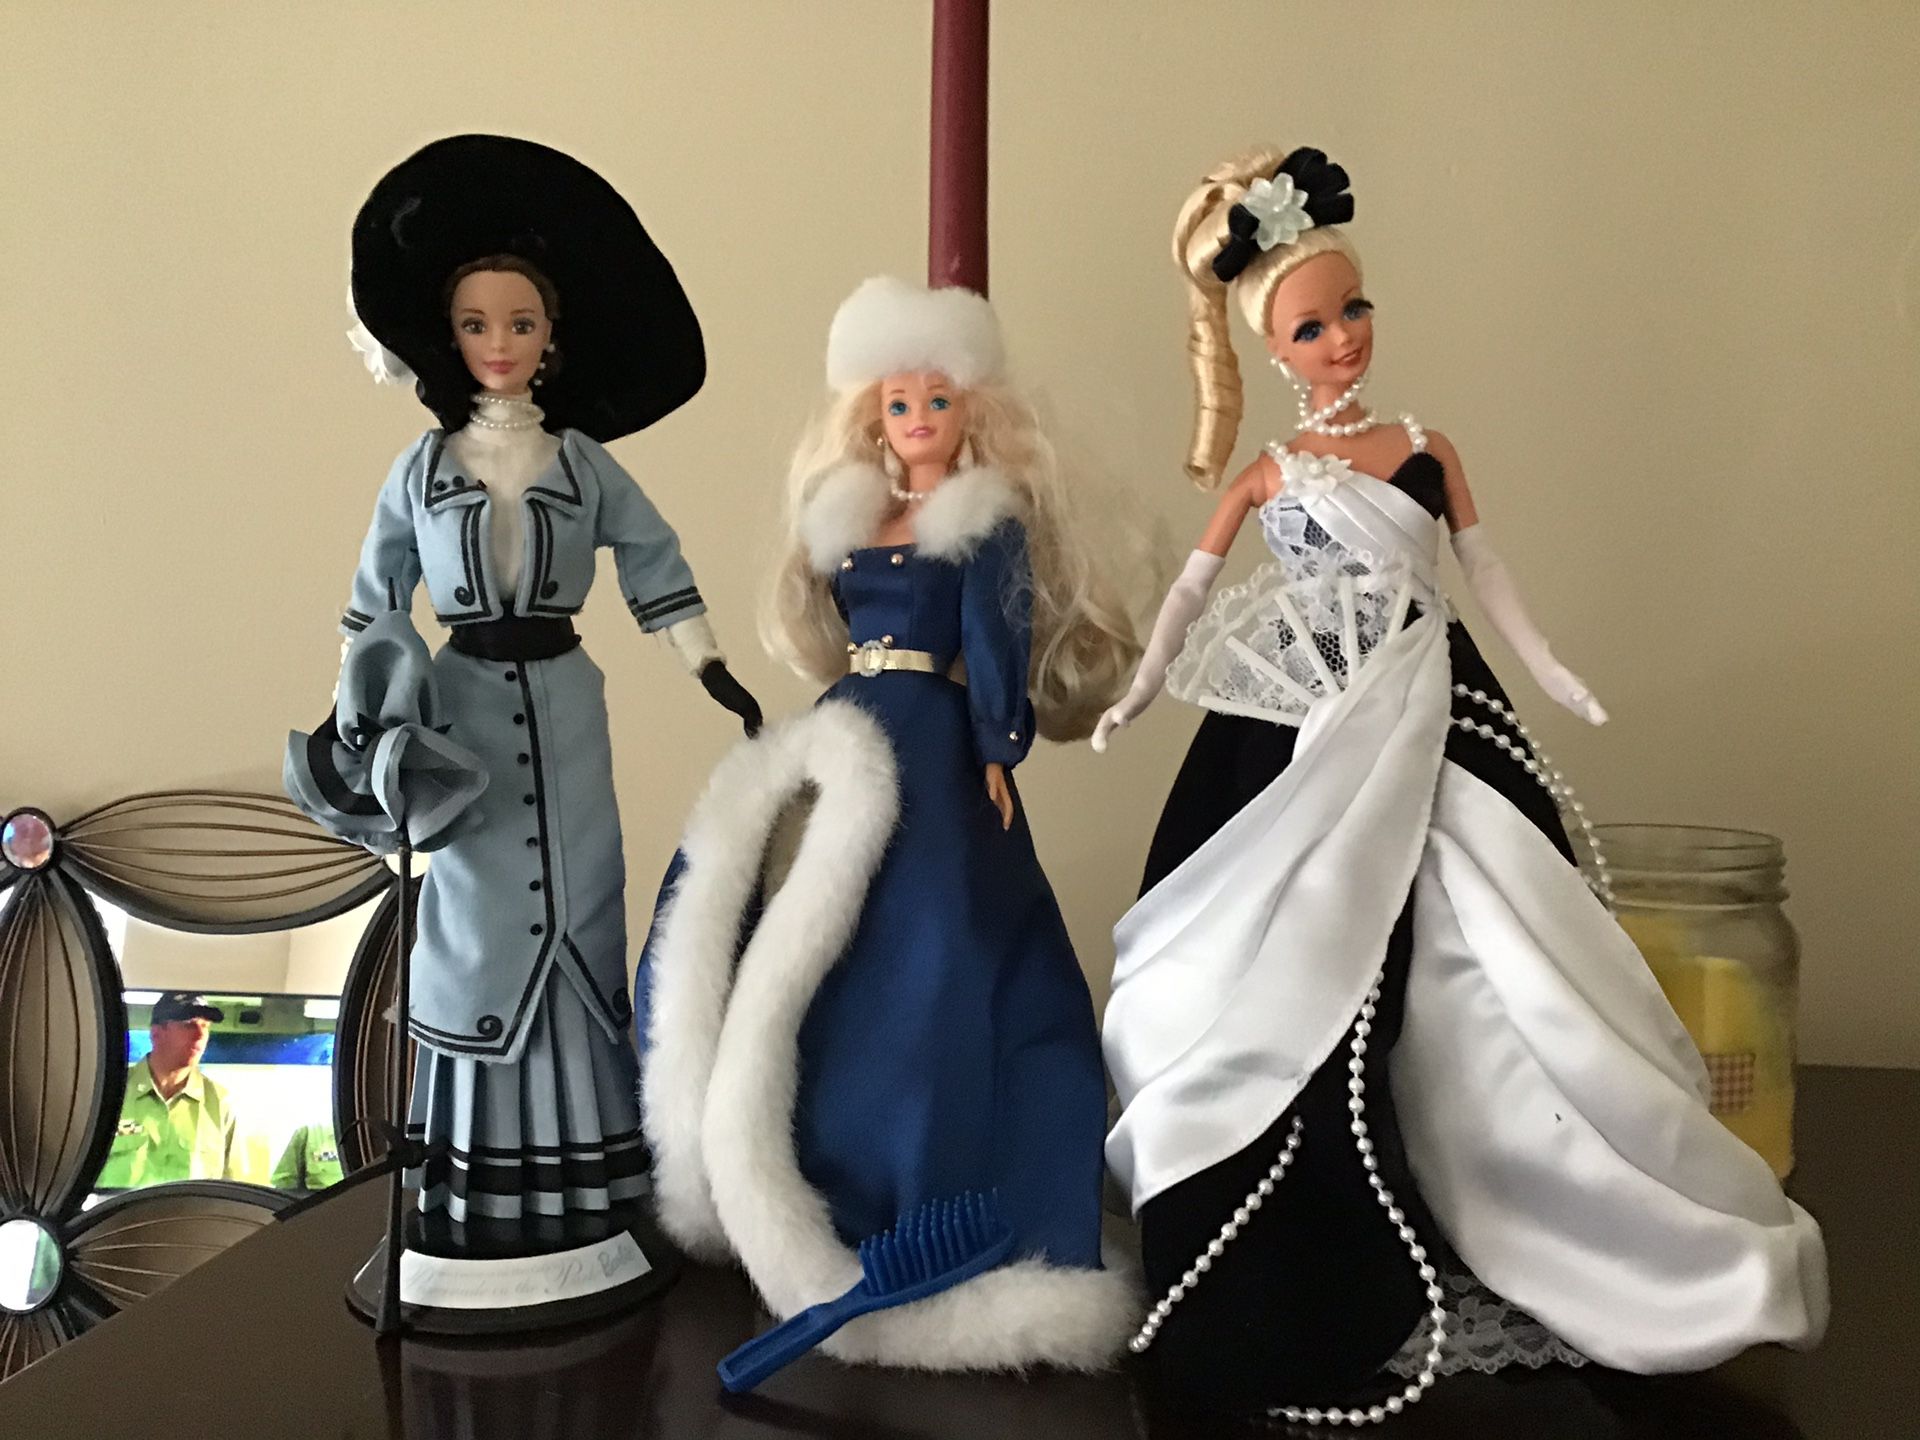 Three collectibles barbies